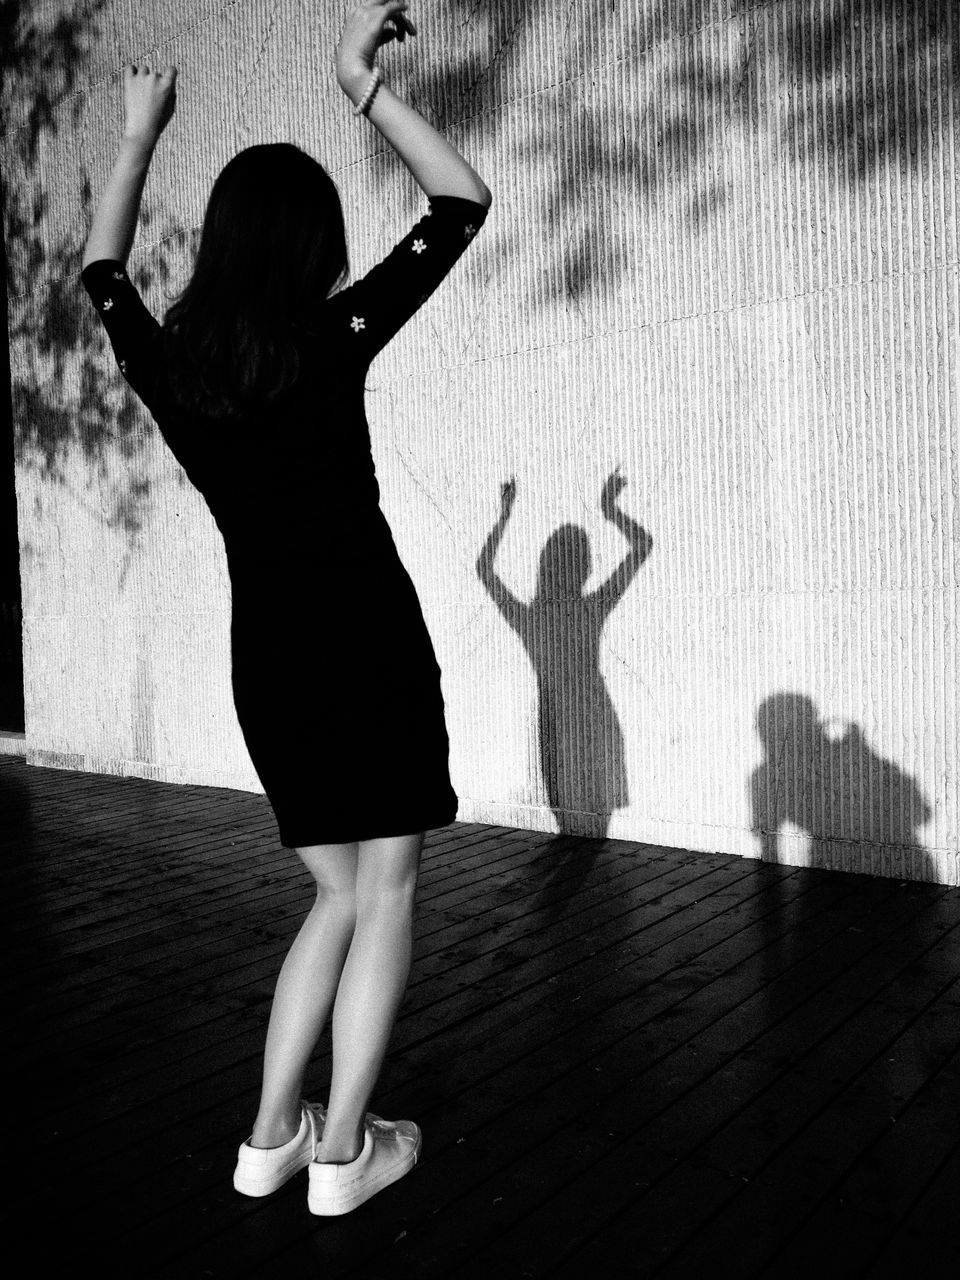 full length, shadow, lifestyles, one person, women, rear view, real people, sunlight, arms raised, human arm, day, leisure activity, adult, standing, dancing, wall - building feature, nature, outdoors, hairstyle, hand raised